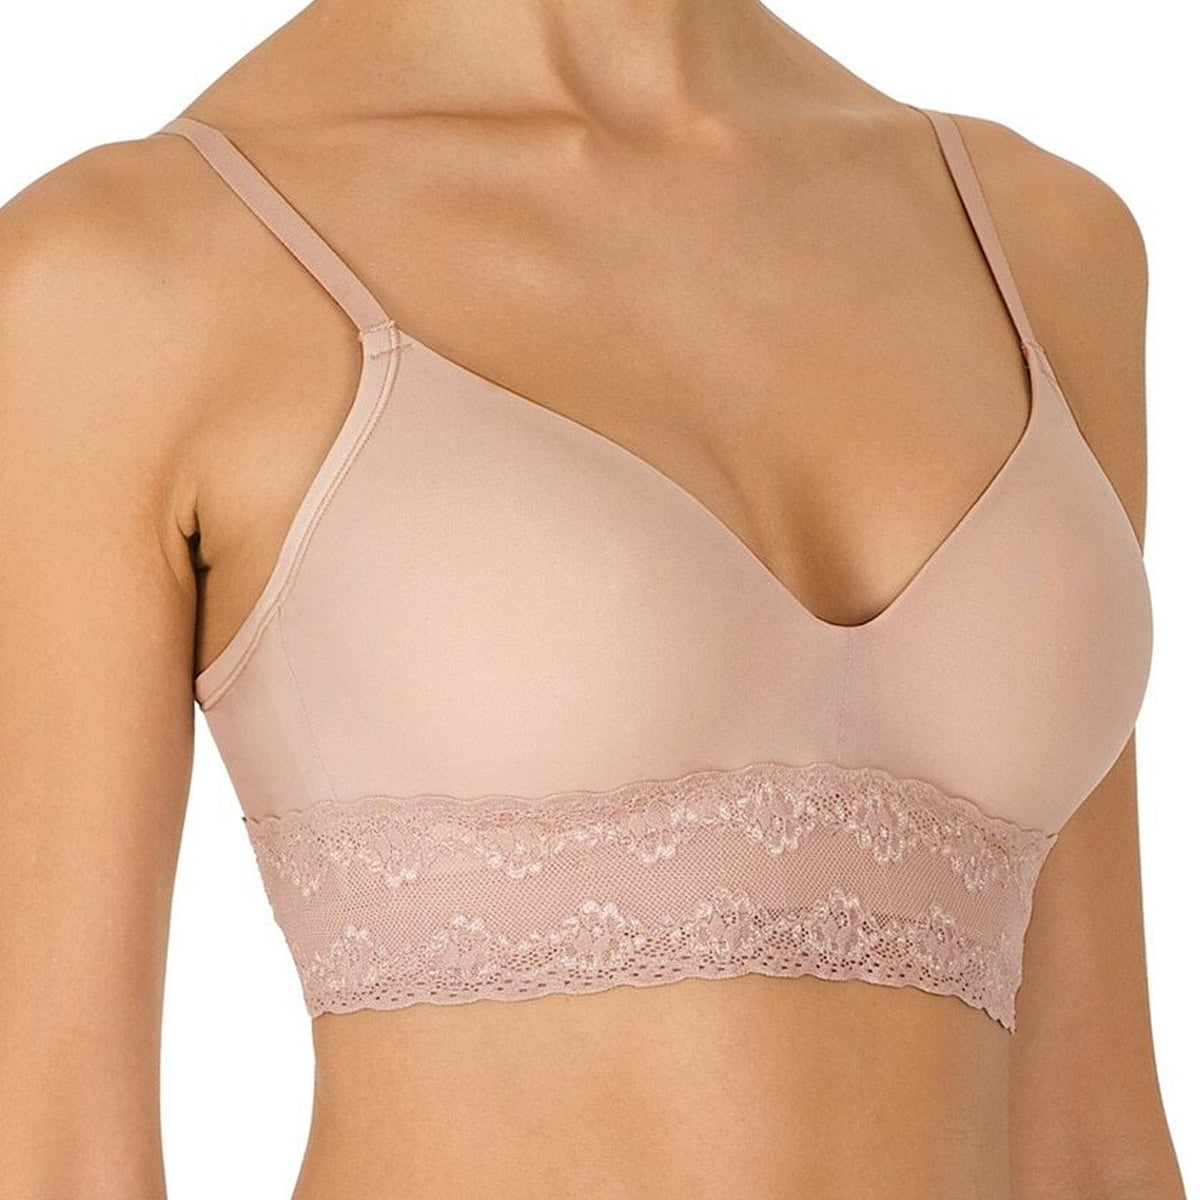  TTCPUYSA Secret Lane Bare Bralette,Support Bras for Women,Full  Coverage and Lift Criss Cross in Front Push Up Wireless Bra,Posture  Corrector Bra (3XL, Beige) : Clothing, Shoes & Jewelry